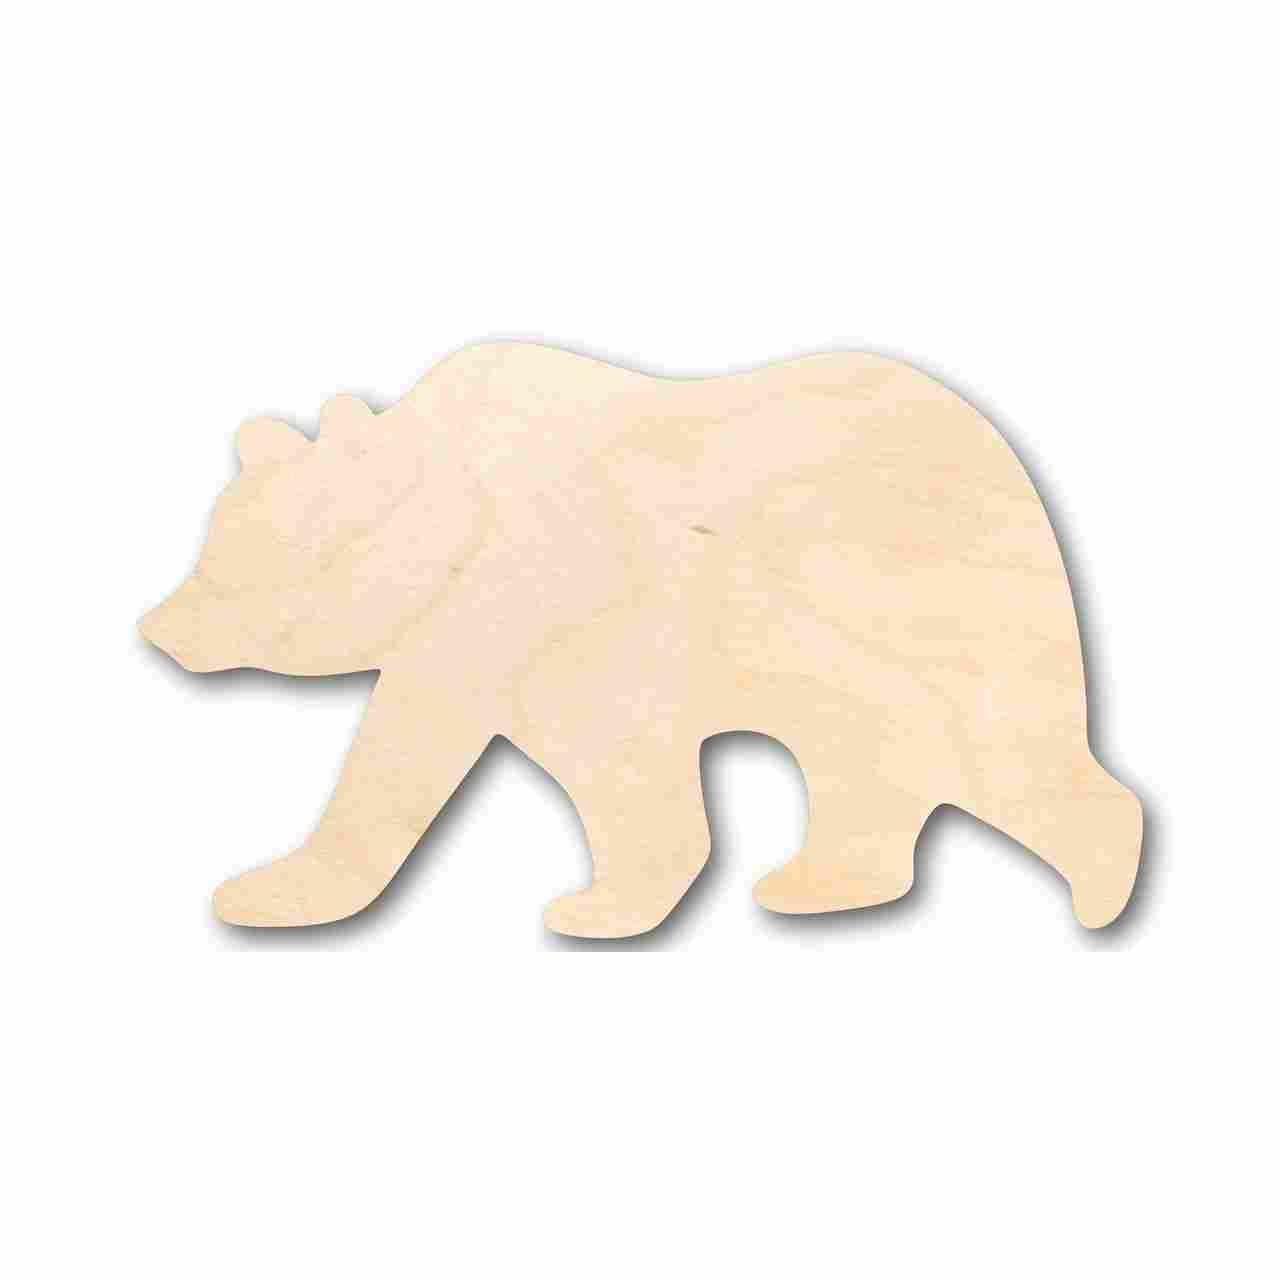 Unfinished Wood Grizzly Bear Shape - Animal - Craft - up to 24" DIY 8" / 1/4"